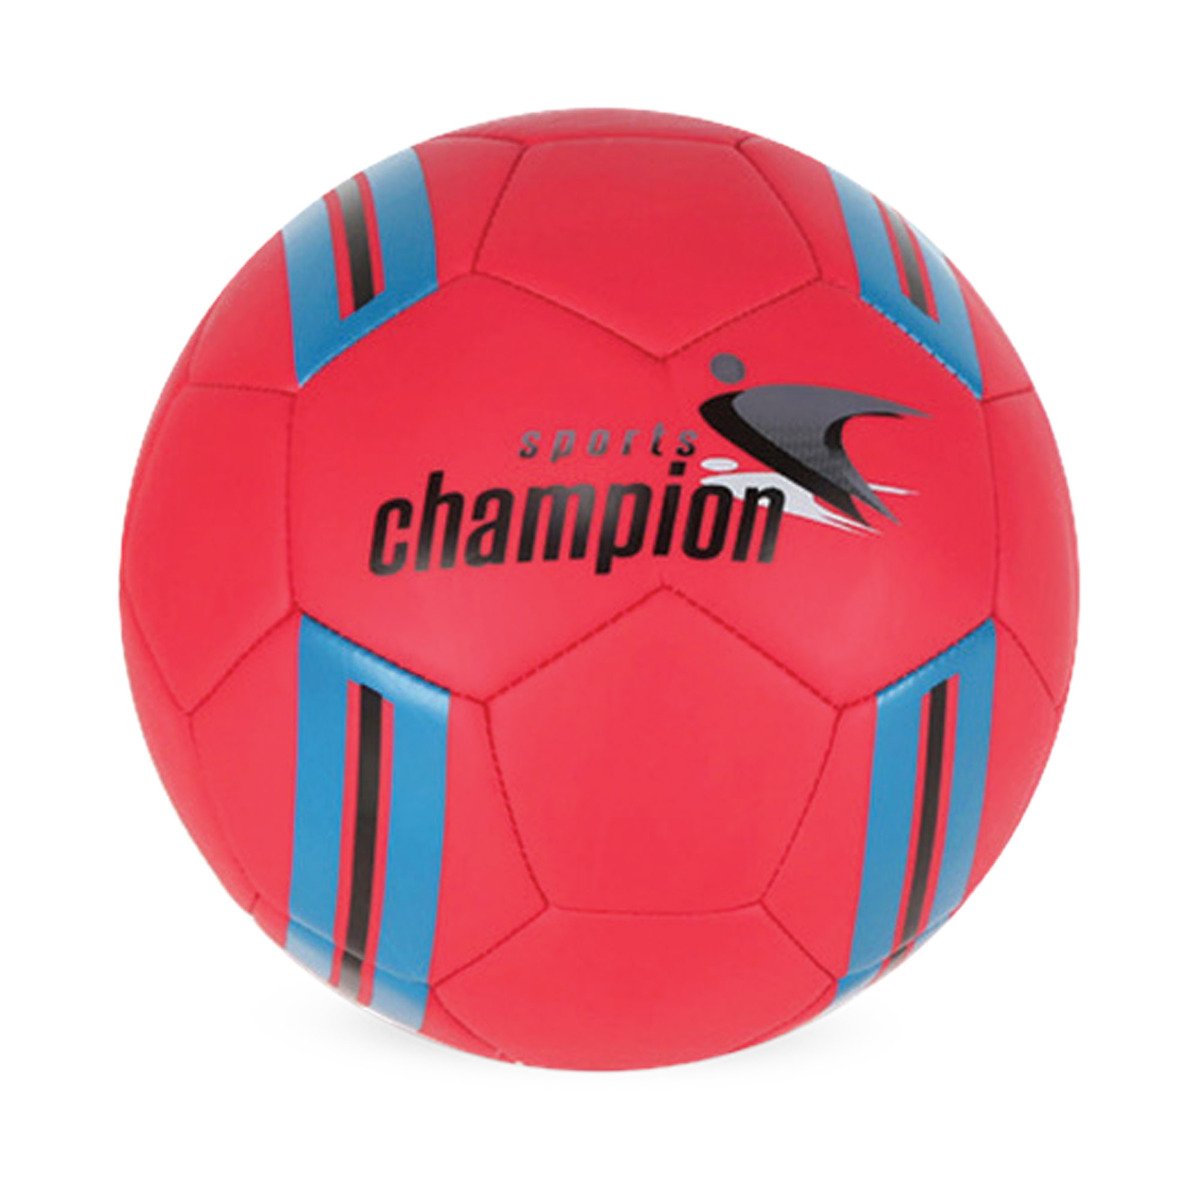 Sports Champion Football Ht19134 Assorted Color & Design